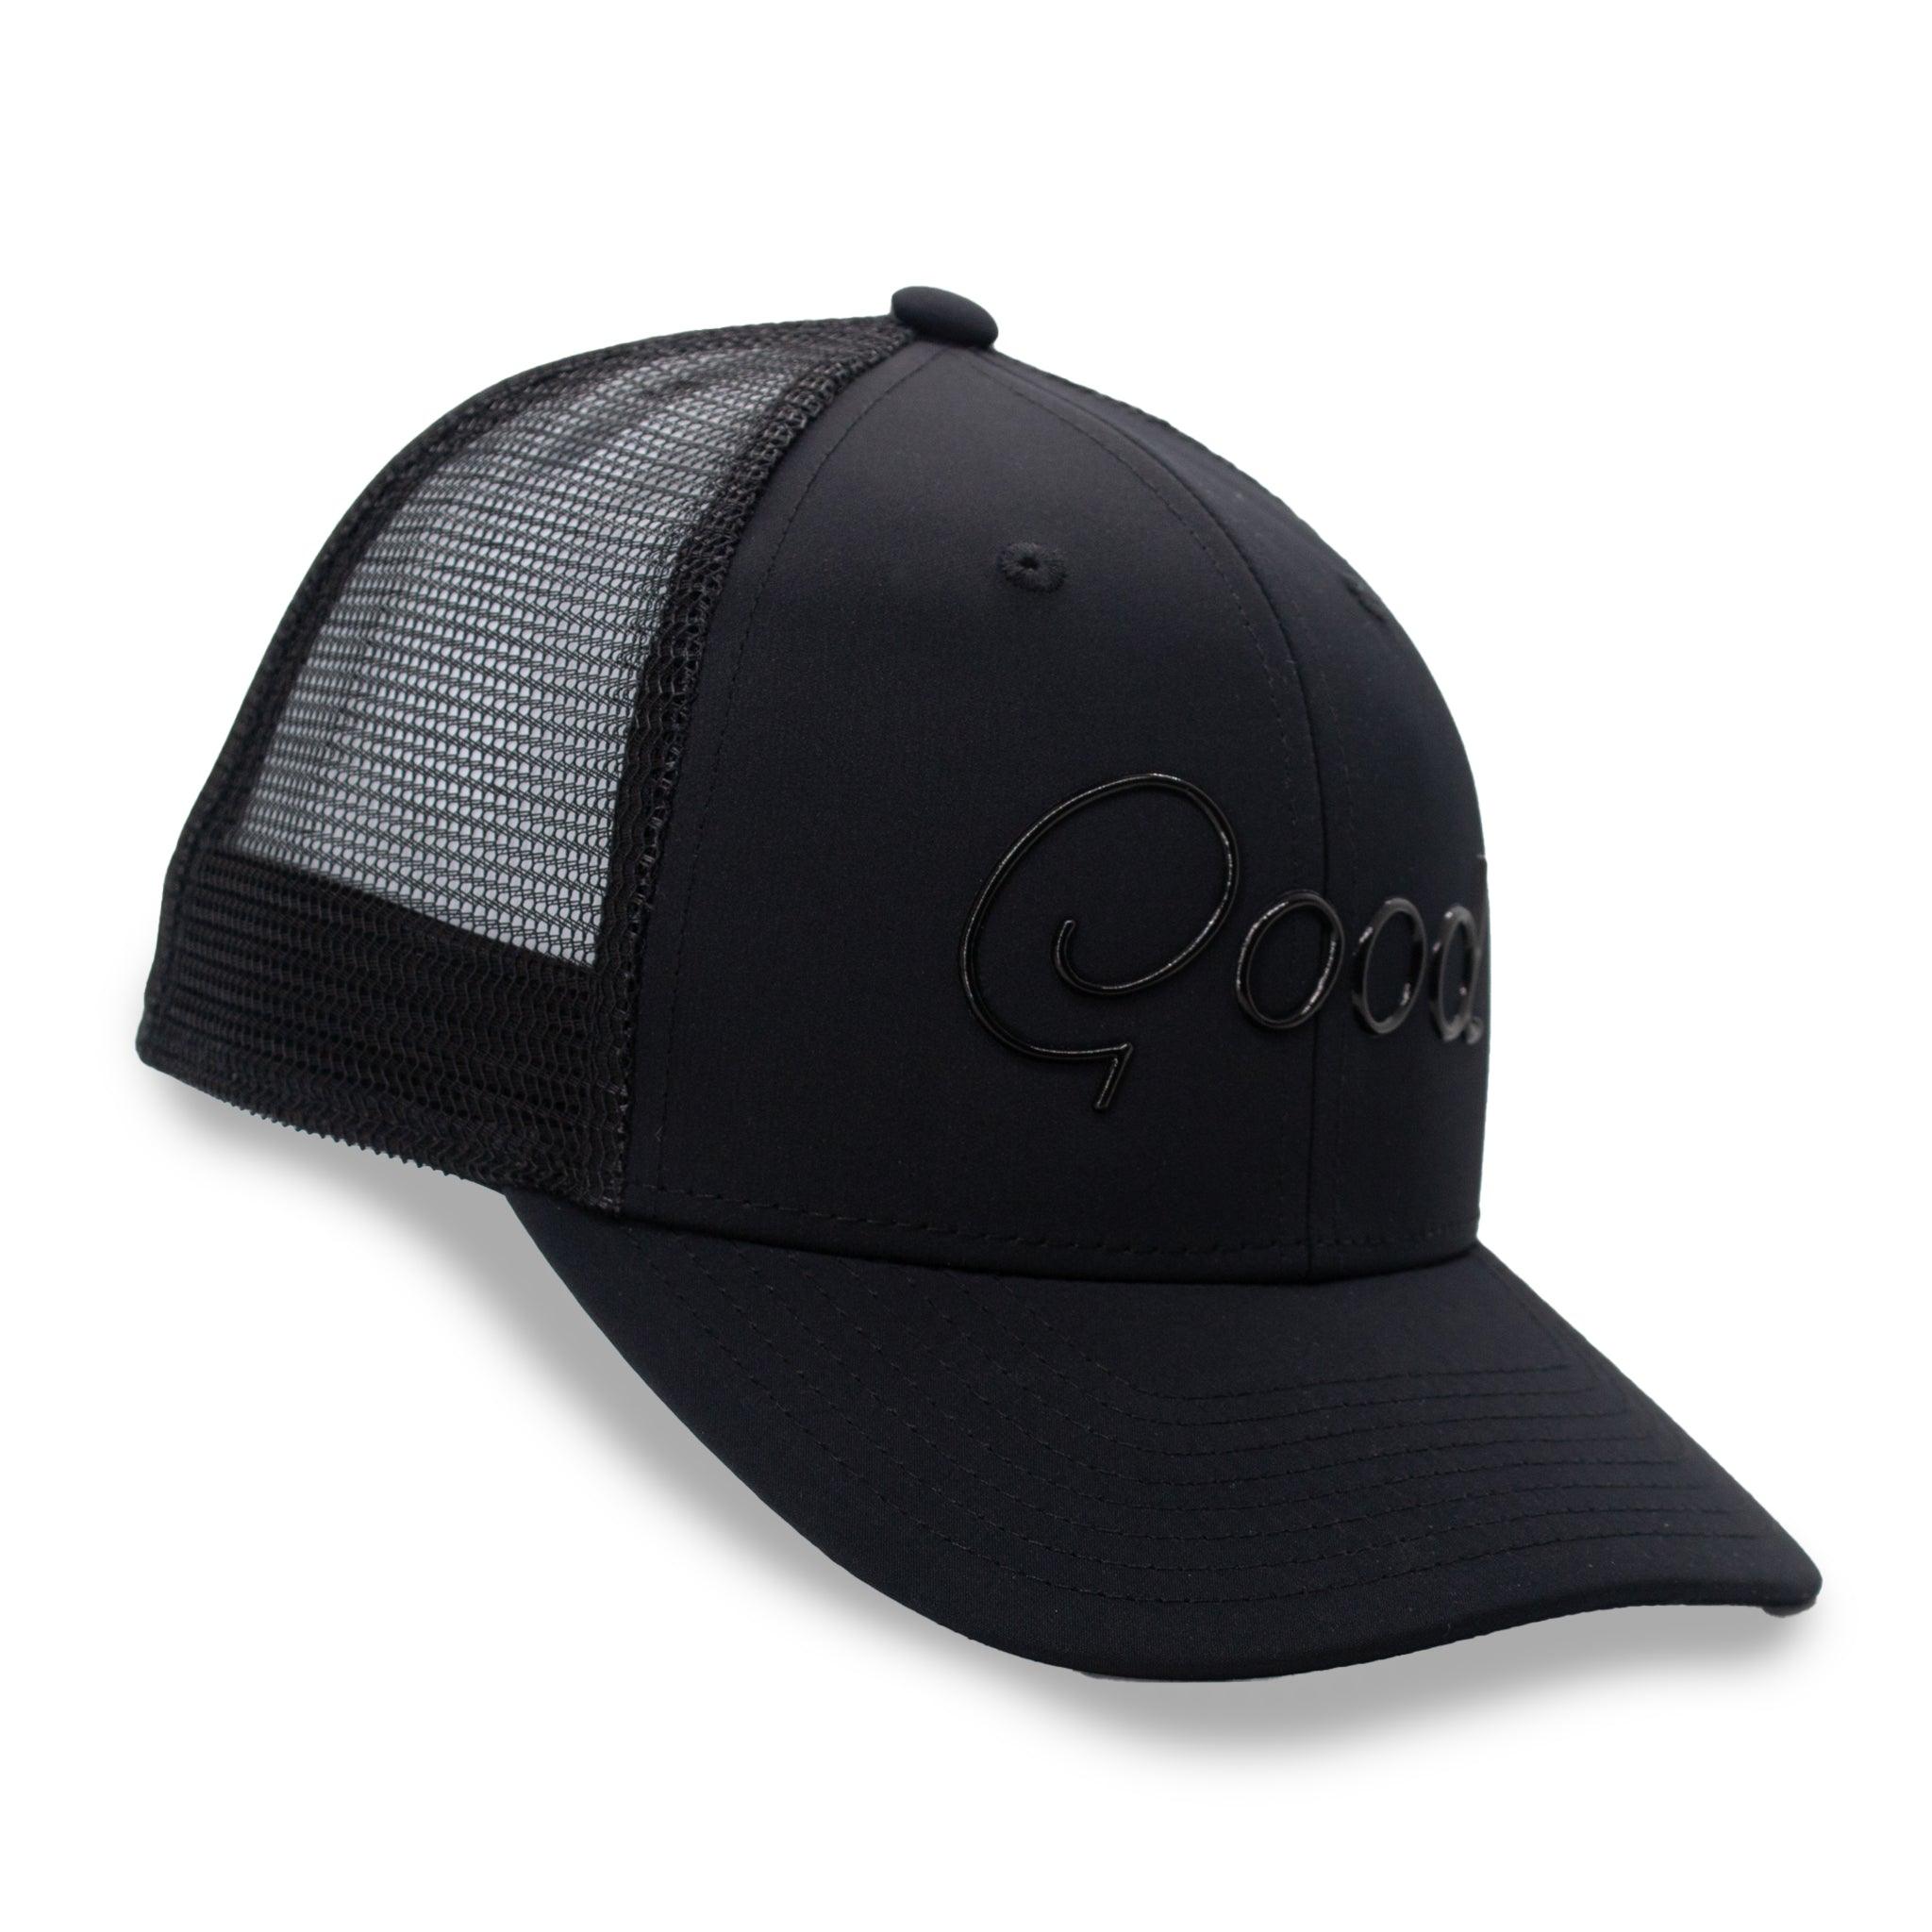 Fade Trucker Hat - Exclusive Golf Hat From Good Good